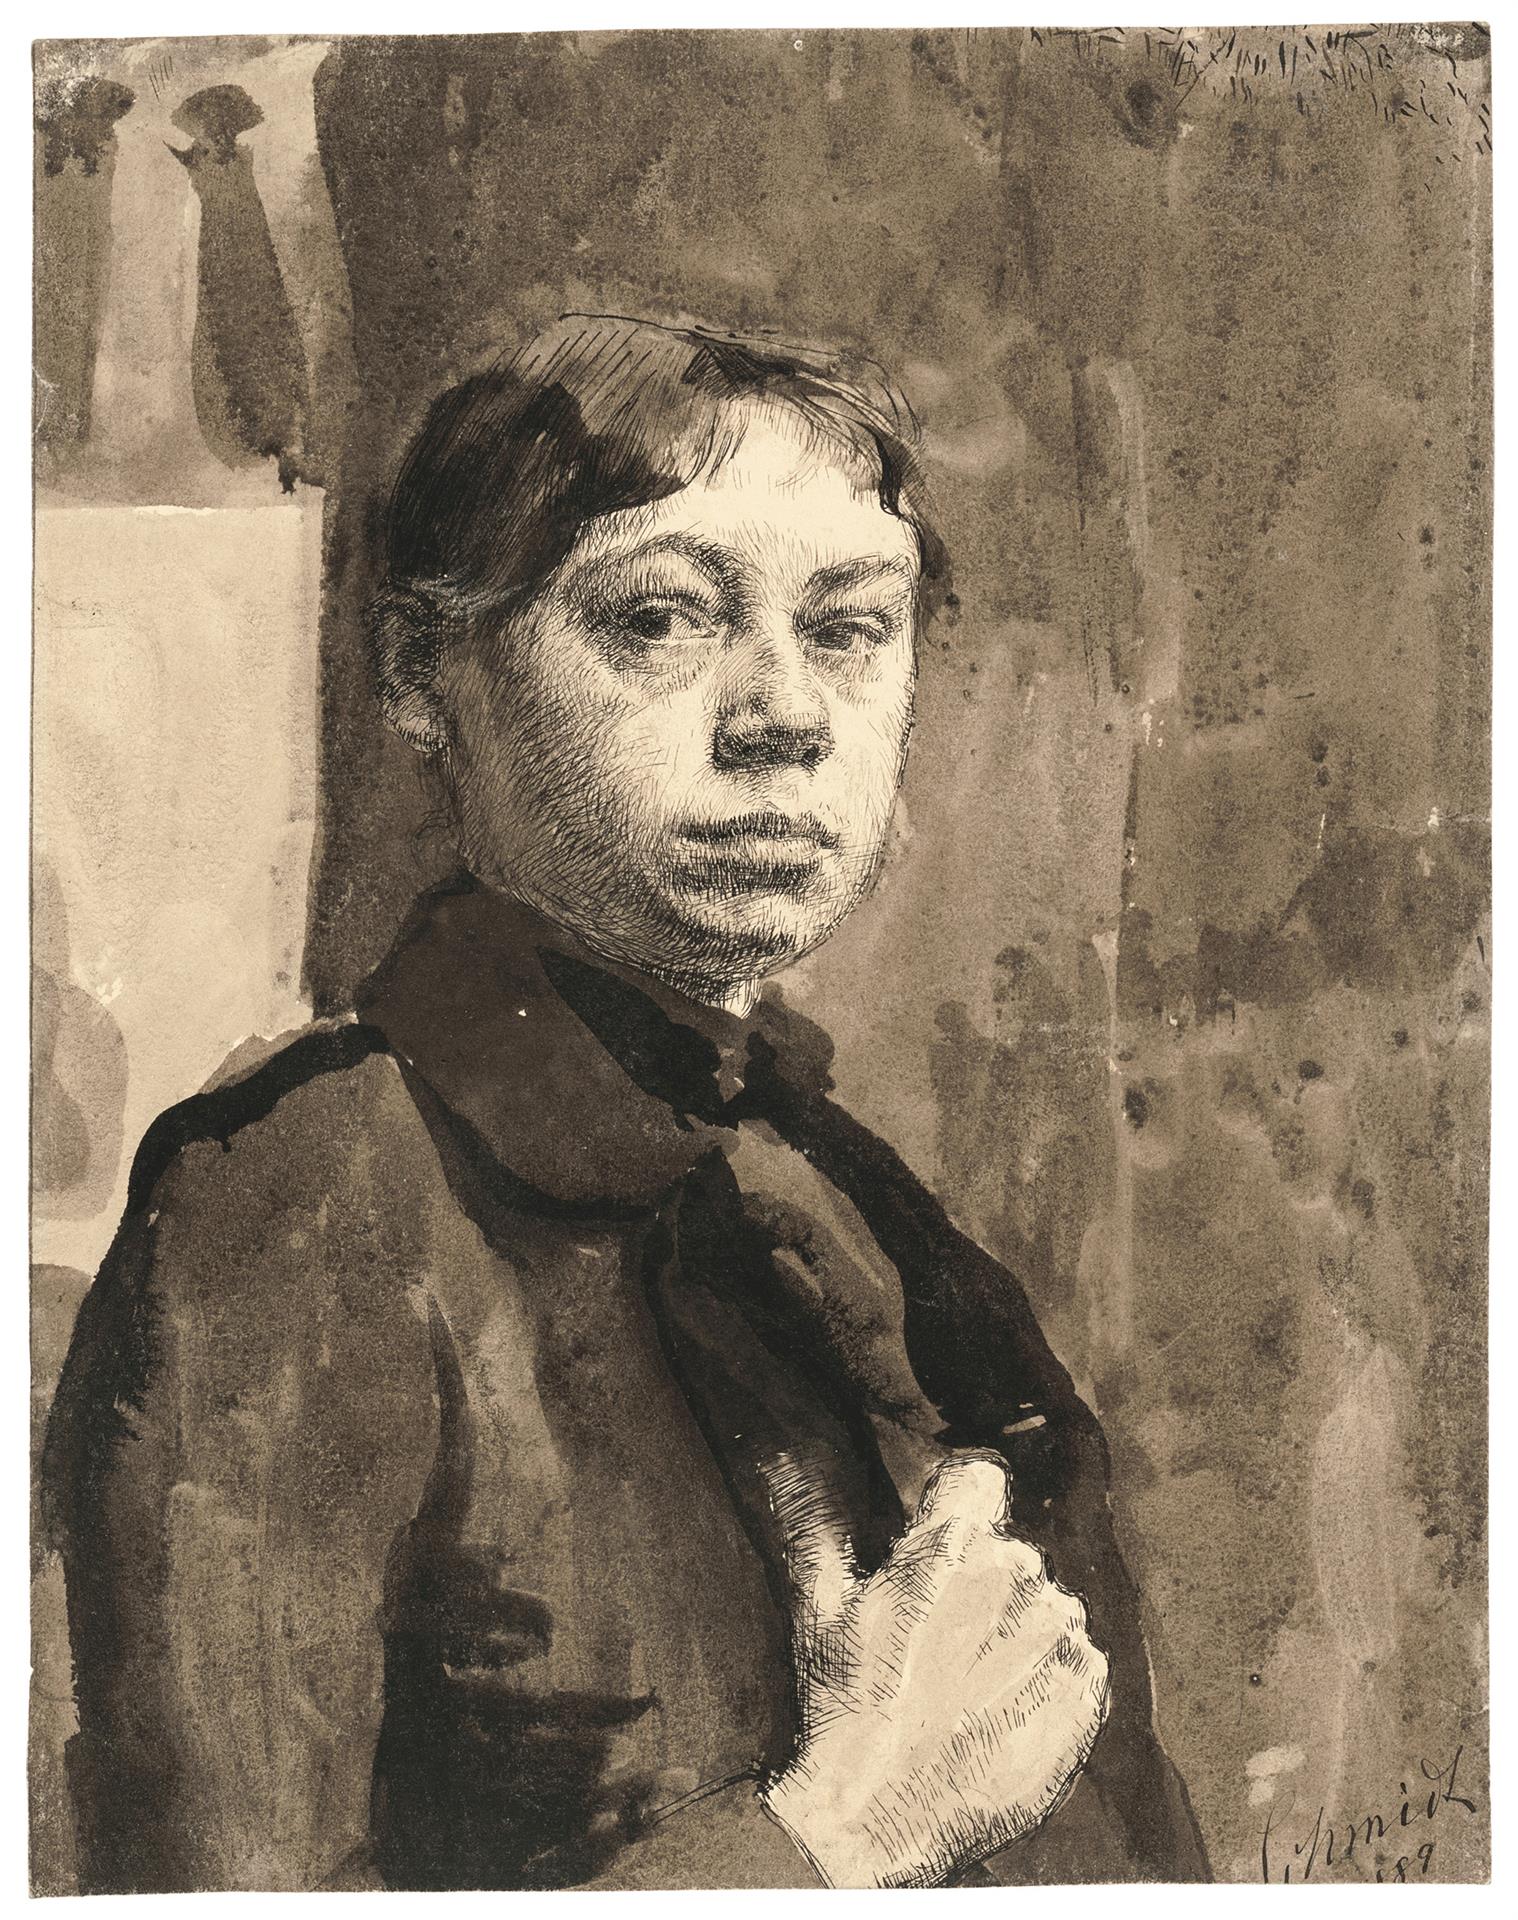 Käthe Kollwitz, Self-portrait, 1889, pen and black ink and brush and sepia on drawing cardboard, NT 12, Cologne Kollwitz Collection © Käthe Kollwitz Museum Köln